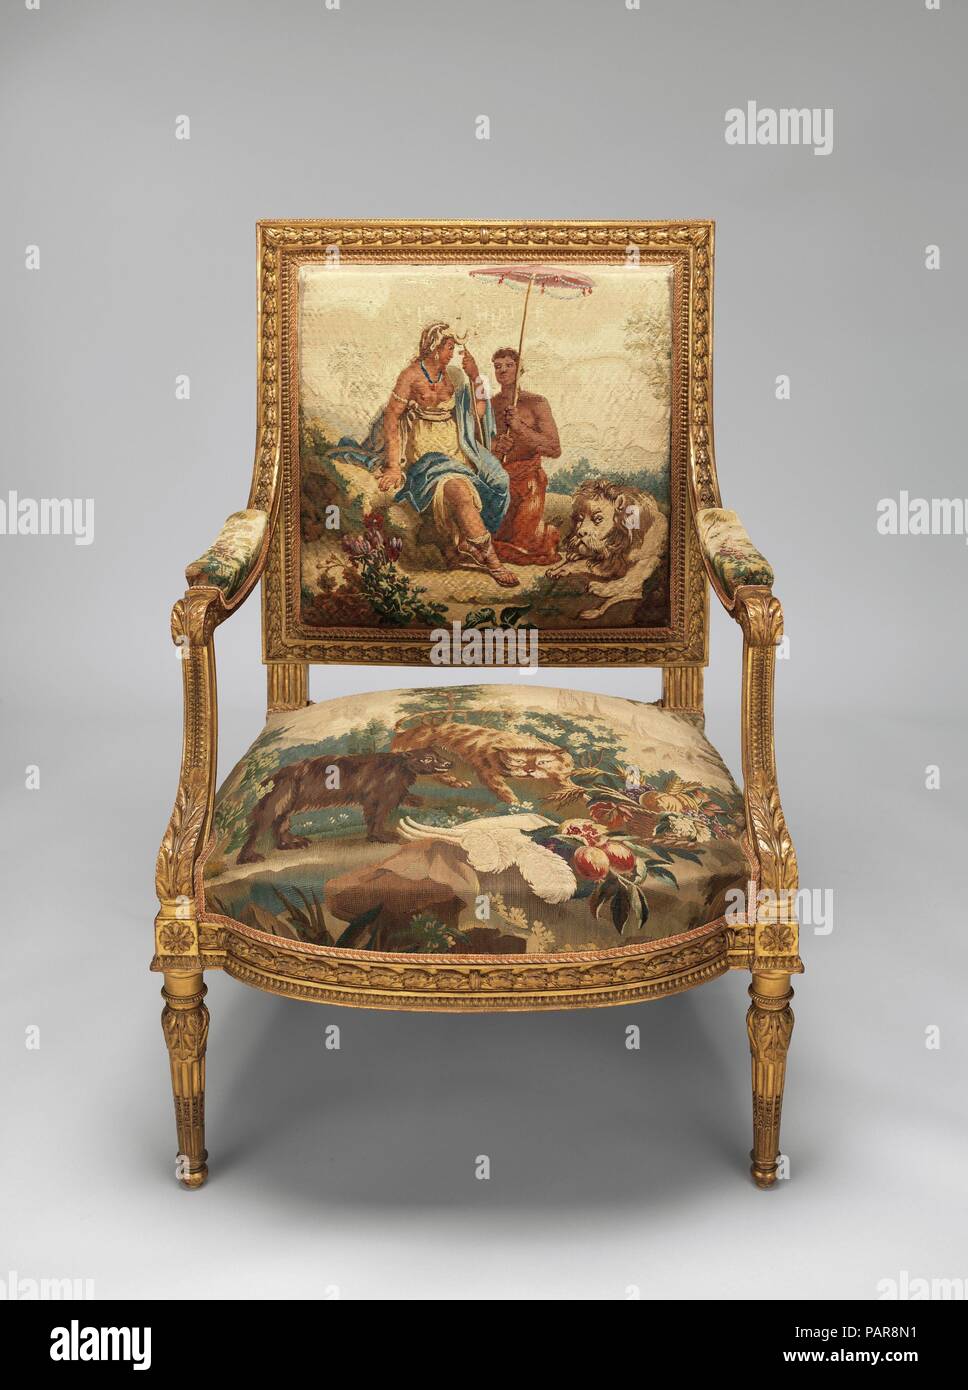 Armchair. Artist: After a composition by Jean Jacques François Le Barbier (French, Rouen 1738-1826 Paris). Culture: French, Beauvais. Dimensions: Overall: 37 3/4 × 27 × 24 in. (95.9 × 68.6 × 61 cm). Factory: Tapestry upholstery by Beauvais. Maker: Workshop of de Menou (French, active 1780-93). Patron: Commissioned for Louis XVI, King of France (French, Versailles 1754-1793 Paris). Date: designed ca. 1786, woven 1790-91; chair frame second half 19th century.  Commissioned by Louis XVI, this ensemble belongs to a set of four wall hangings (1978.404.1-.4) and fifty-six pieces of furniture upholst Stock Photo